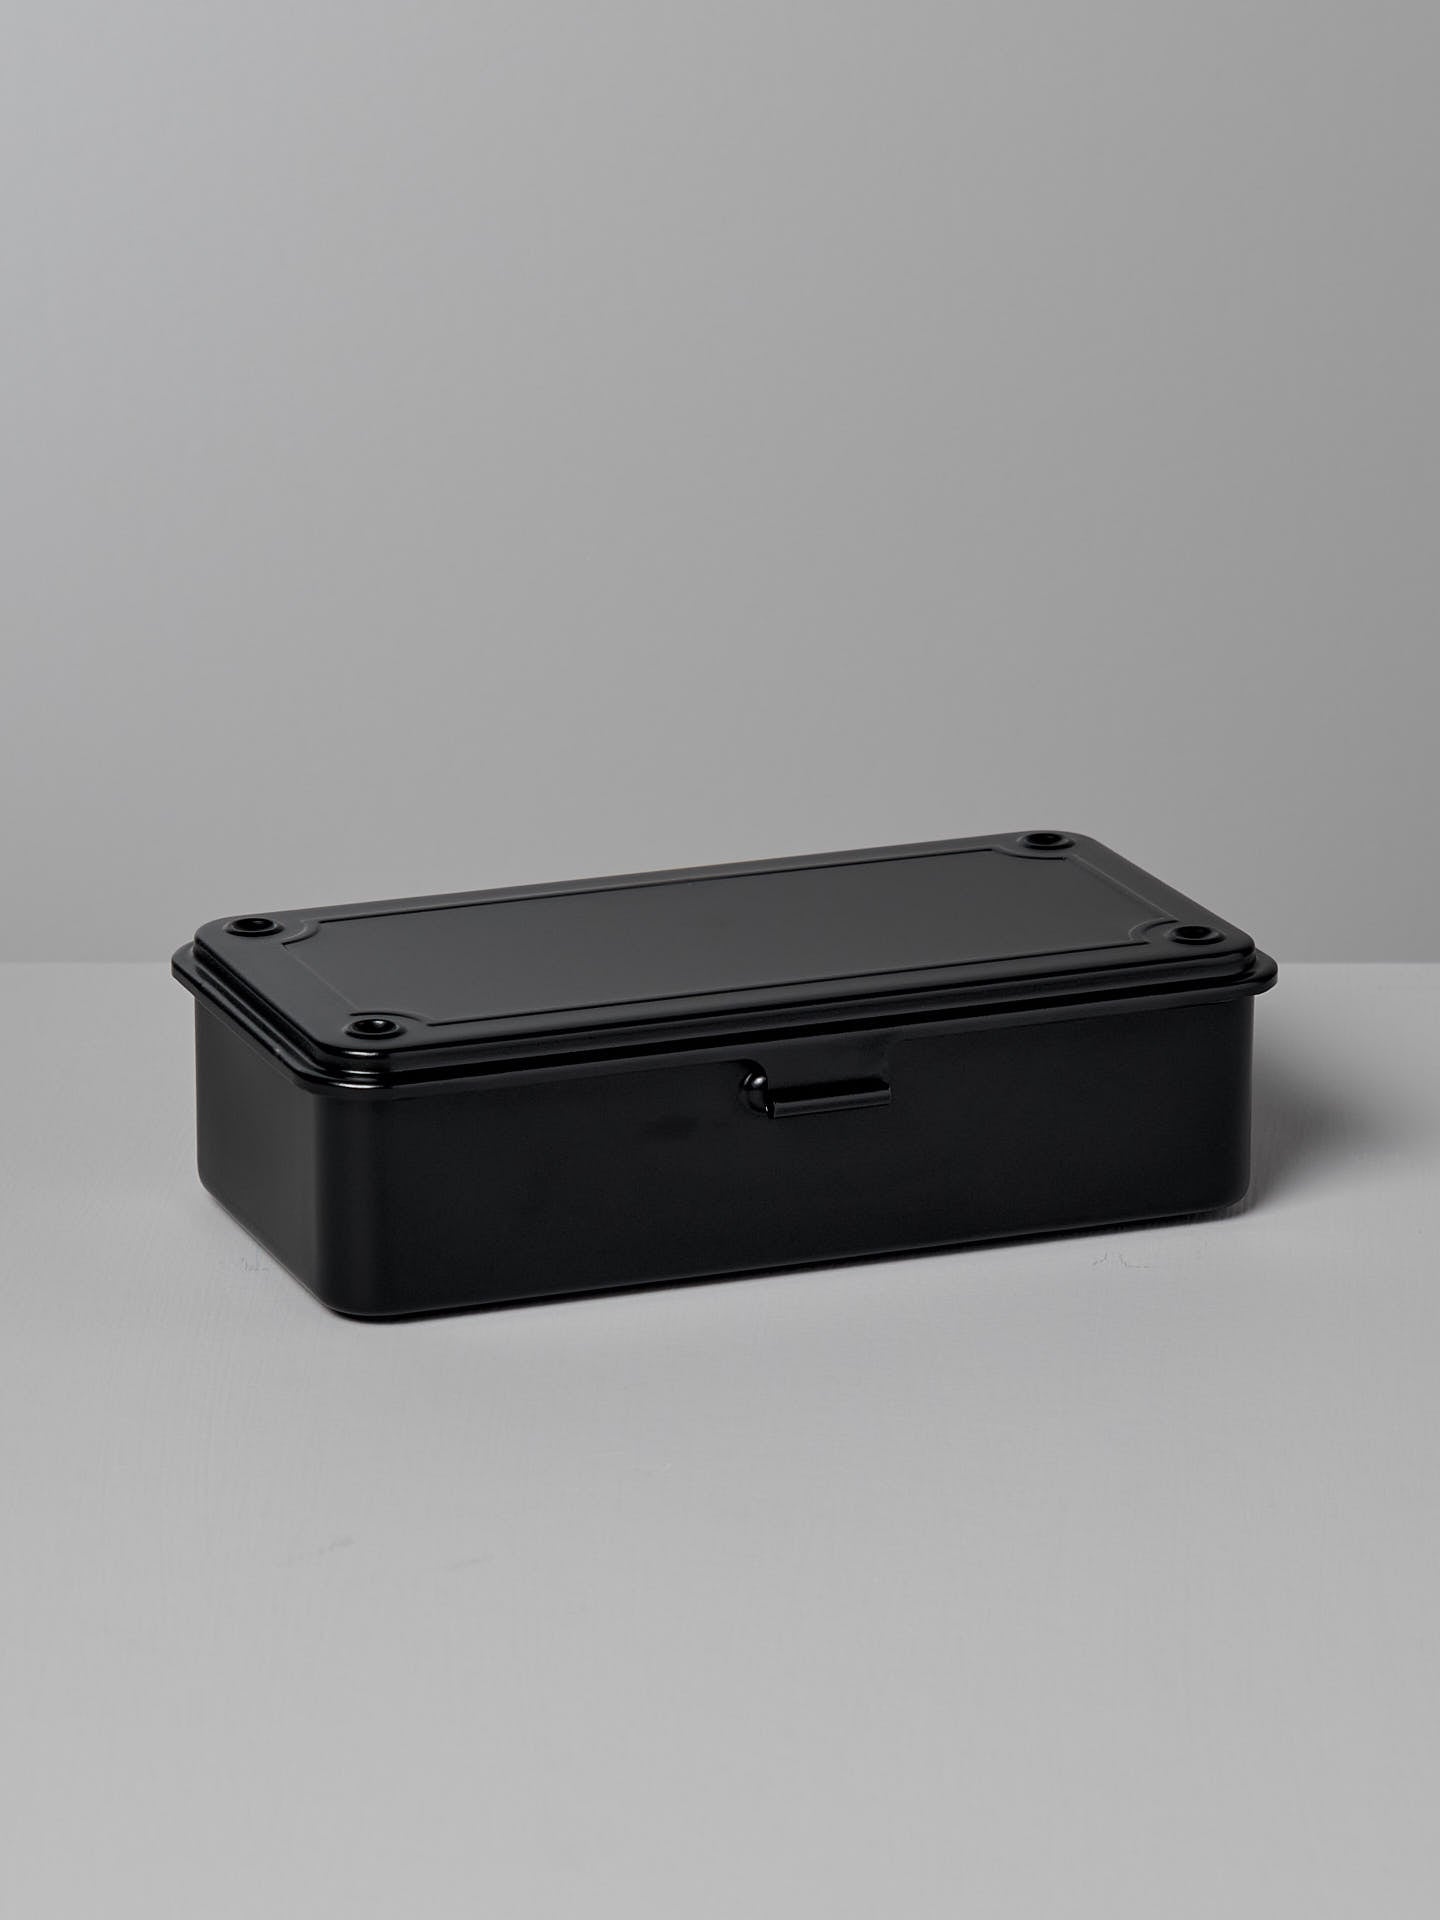 A TOYO STEEL Mini Steel Toolbox T-190 – Black, with rounded edges, sits on a light gray surface against a matching background, showcasing its strong design as an elegant storage solution.